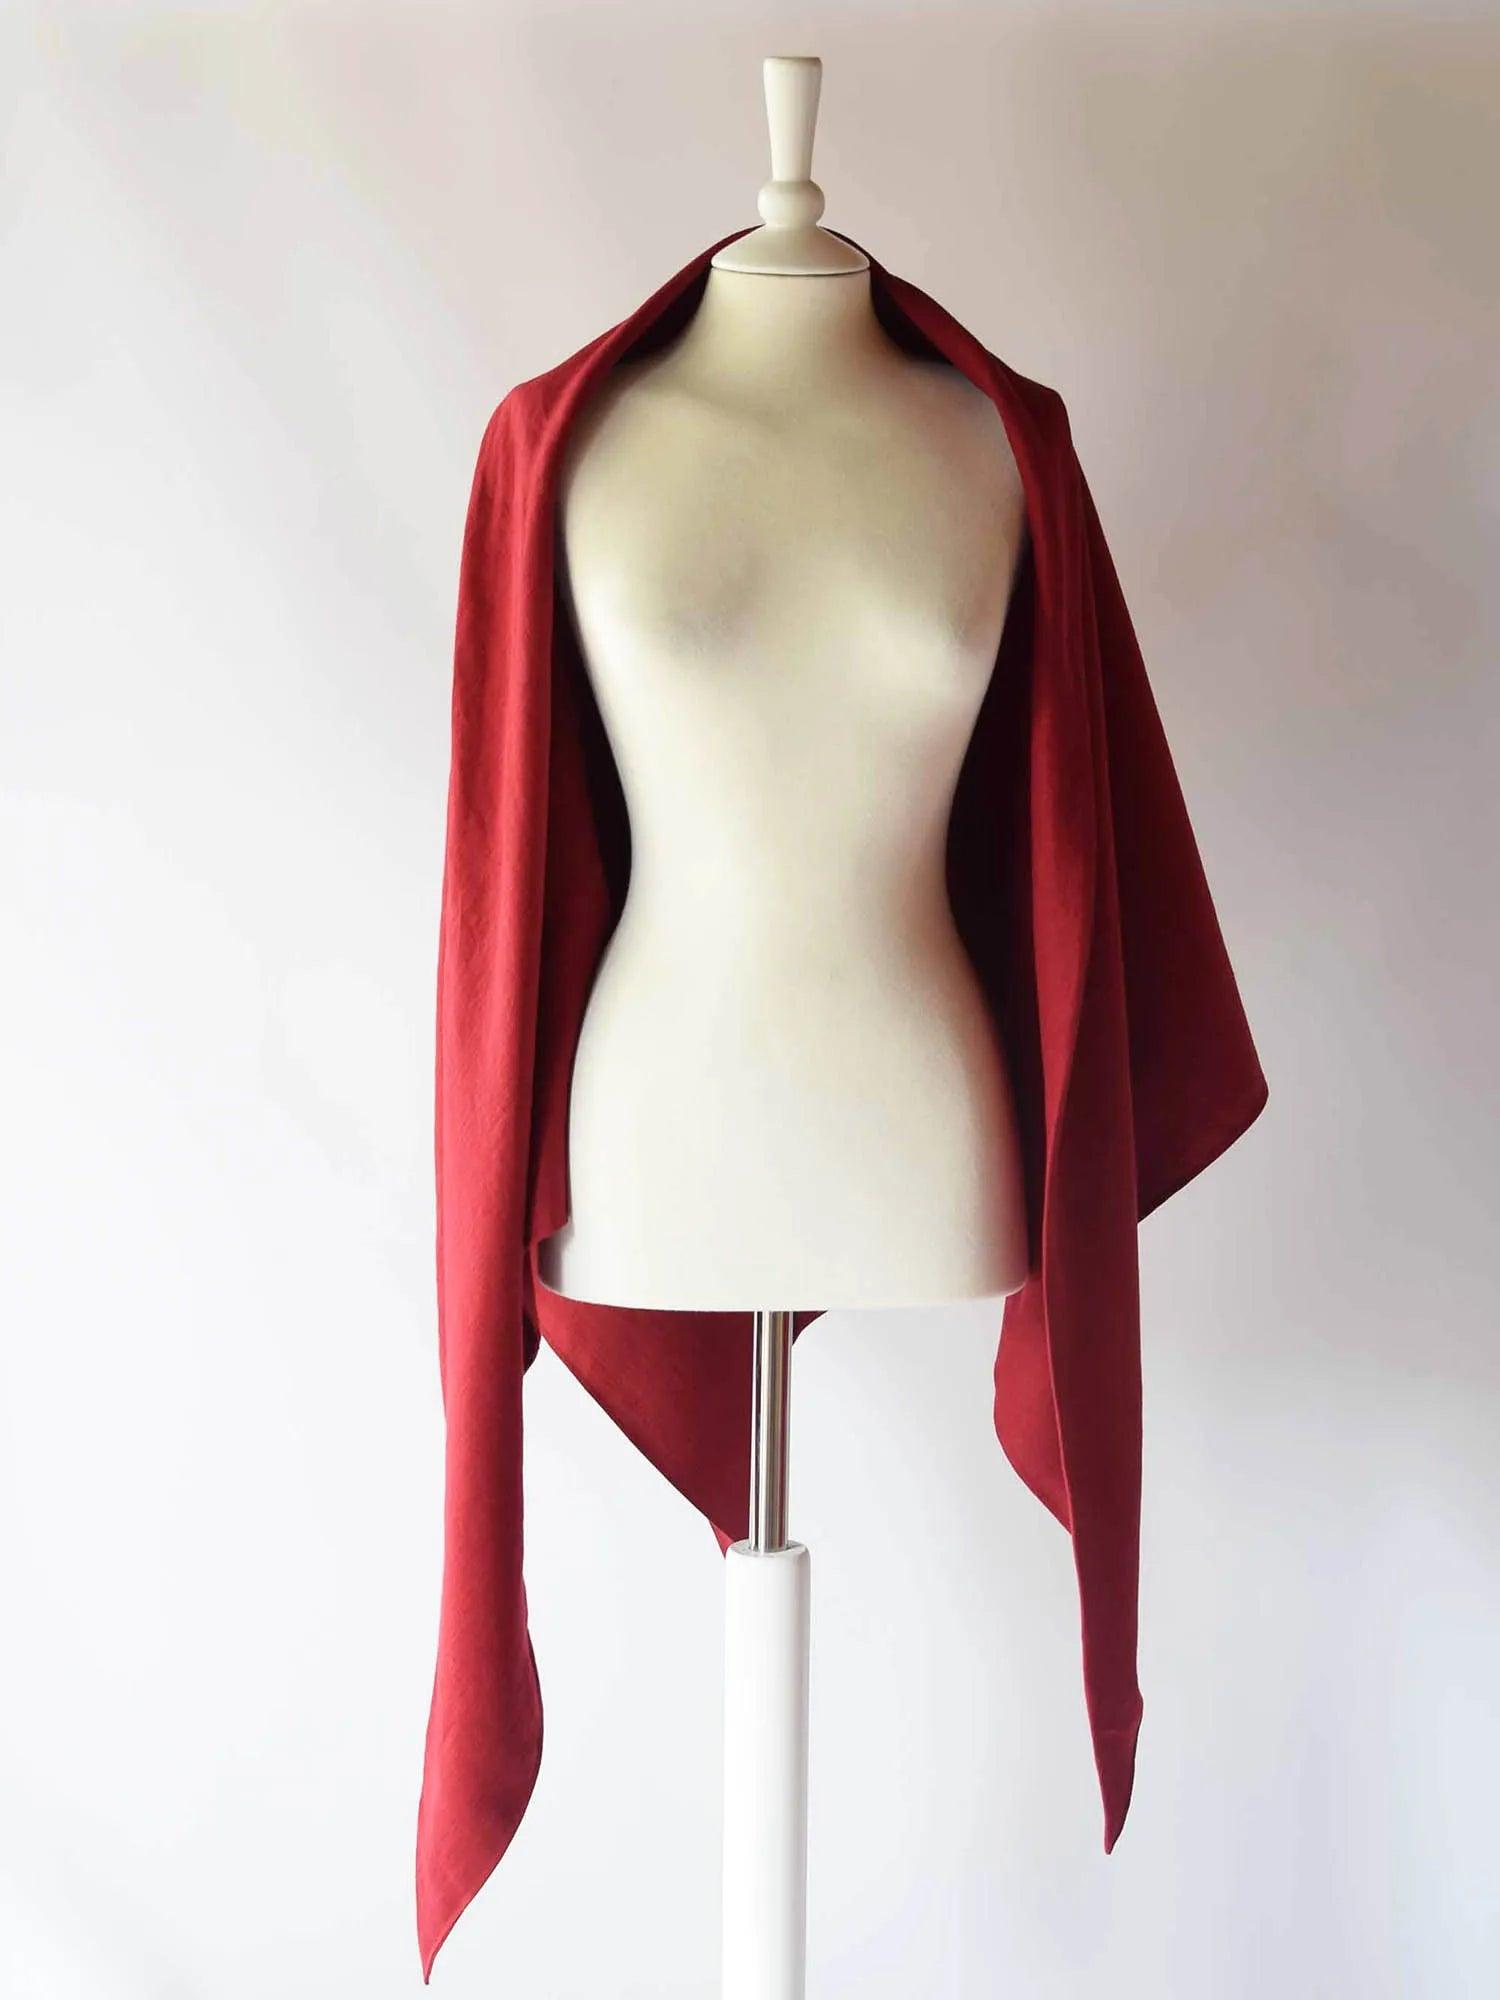 Large Linen Shawl in Cherry Red Linen - Atelier Serraspina